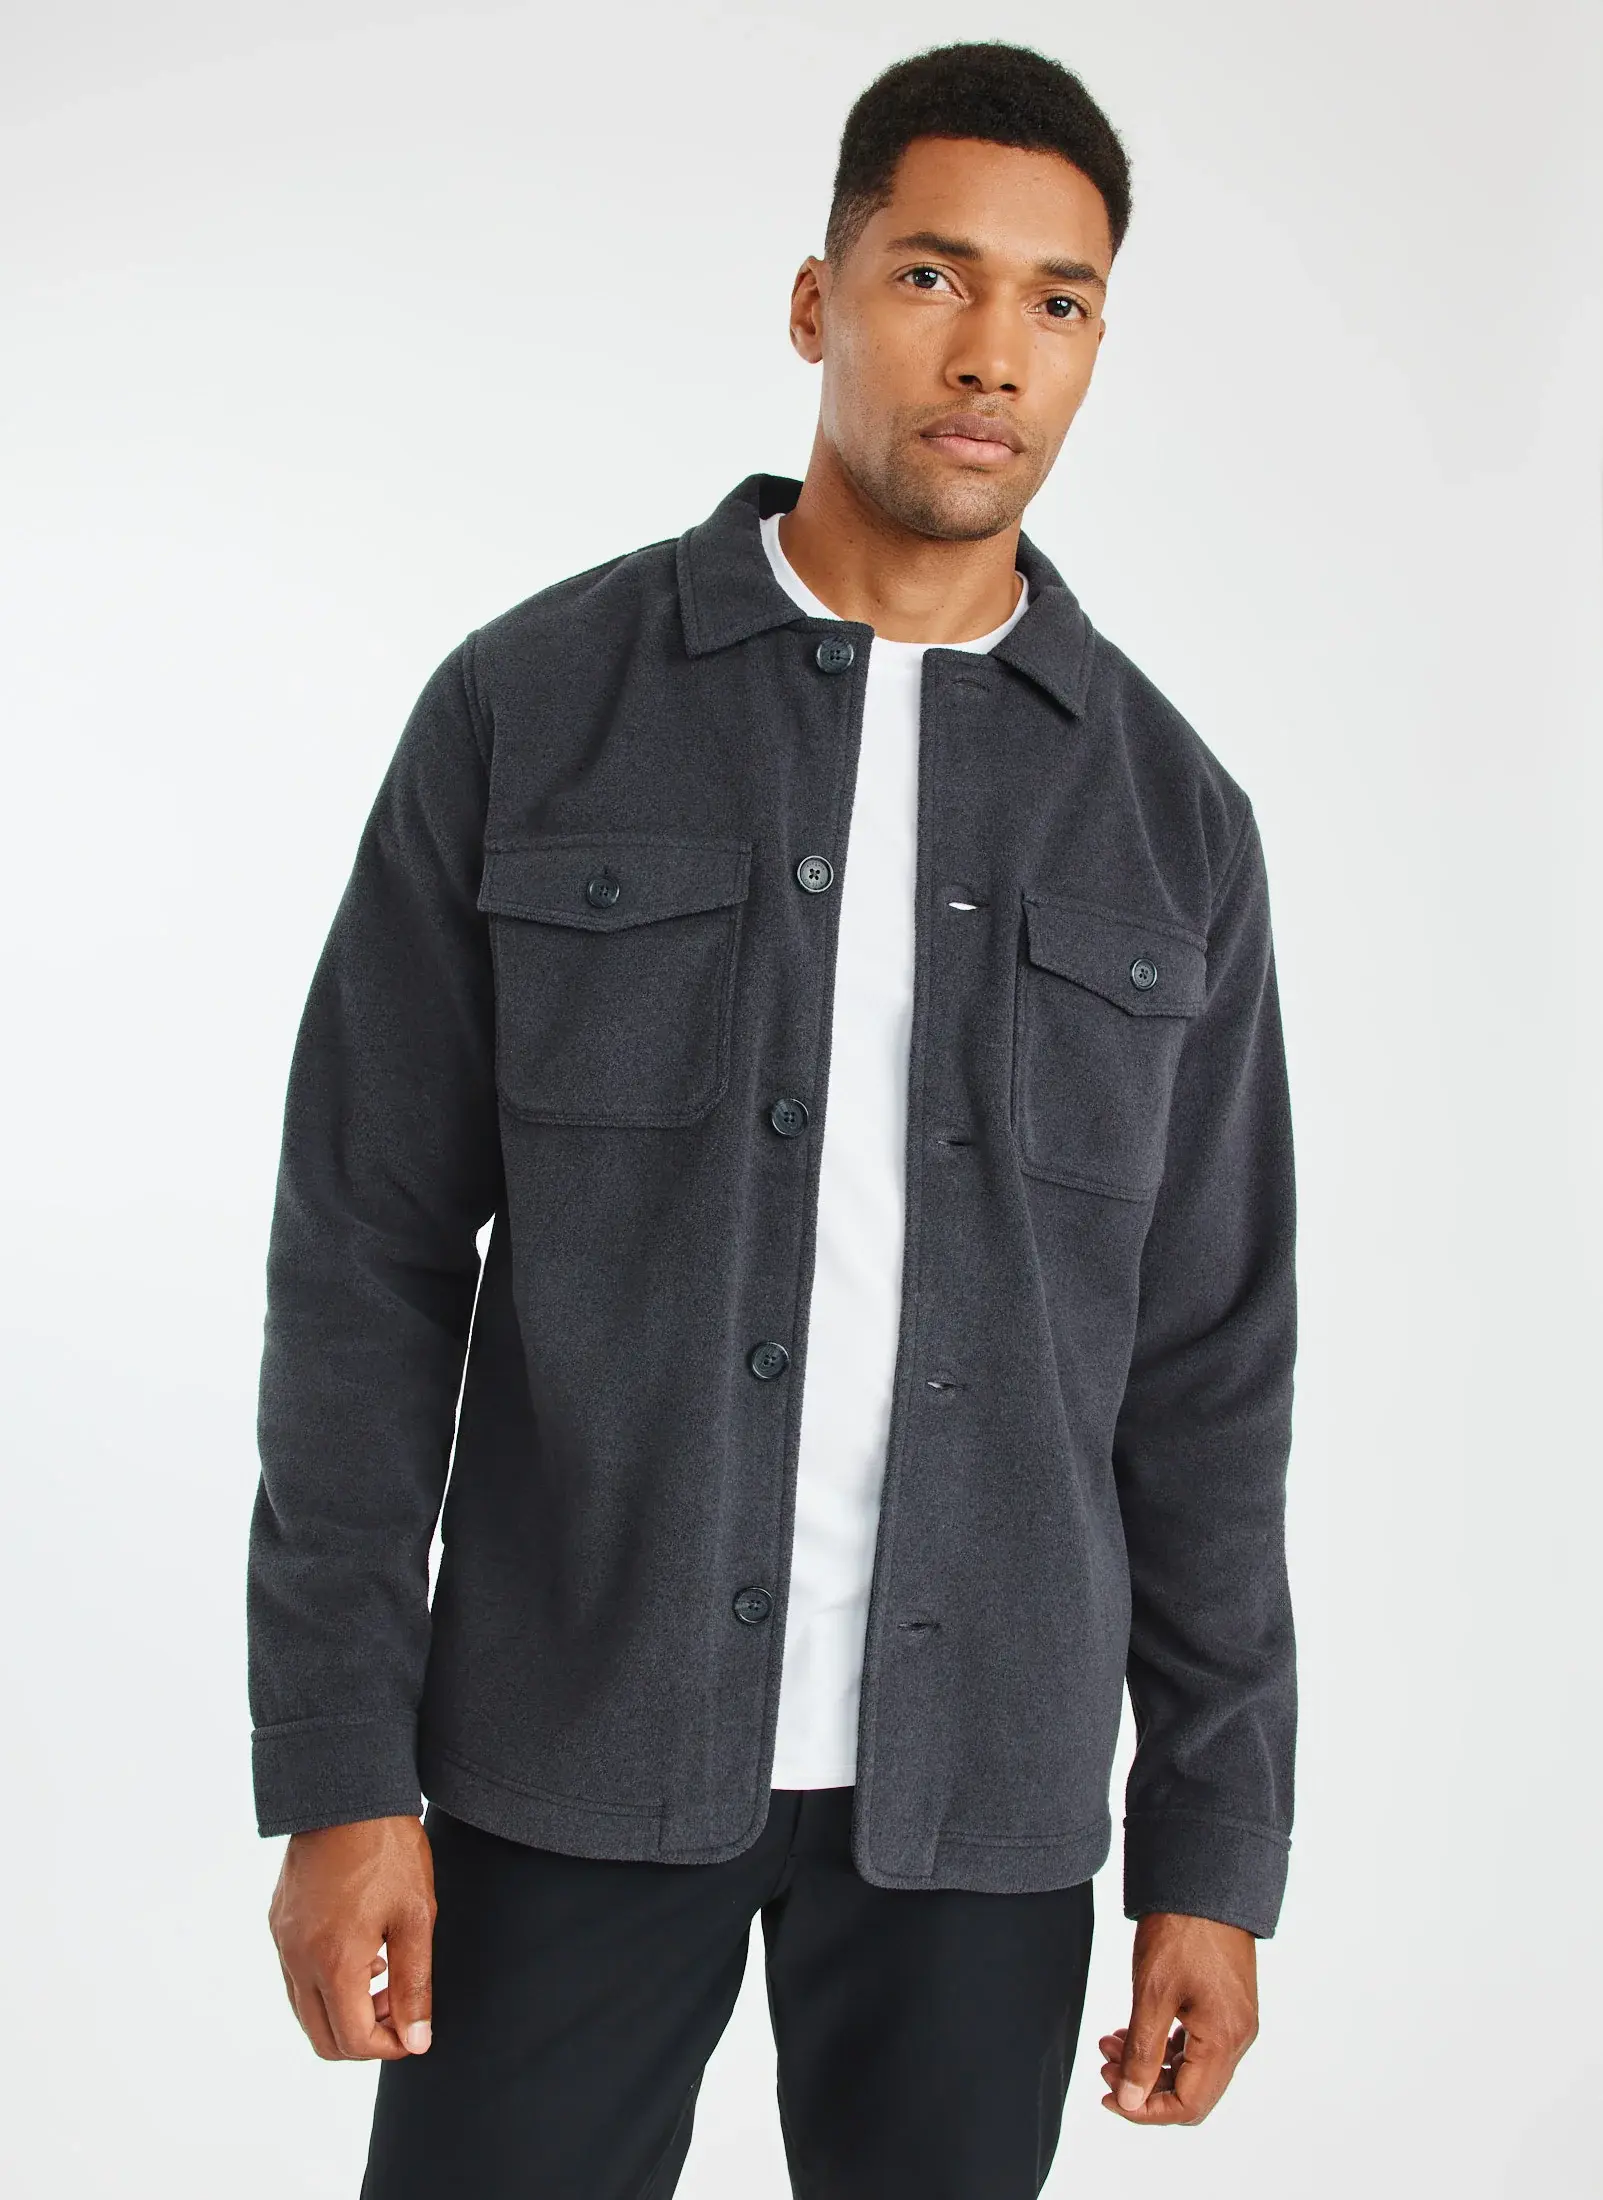 Kit And Ace Water Resistant Fleece Shirt Jacket. 1